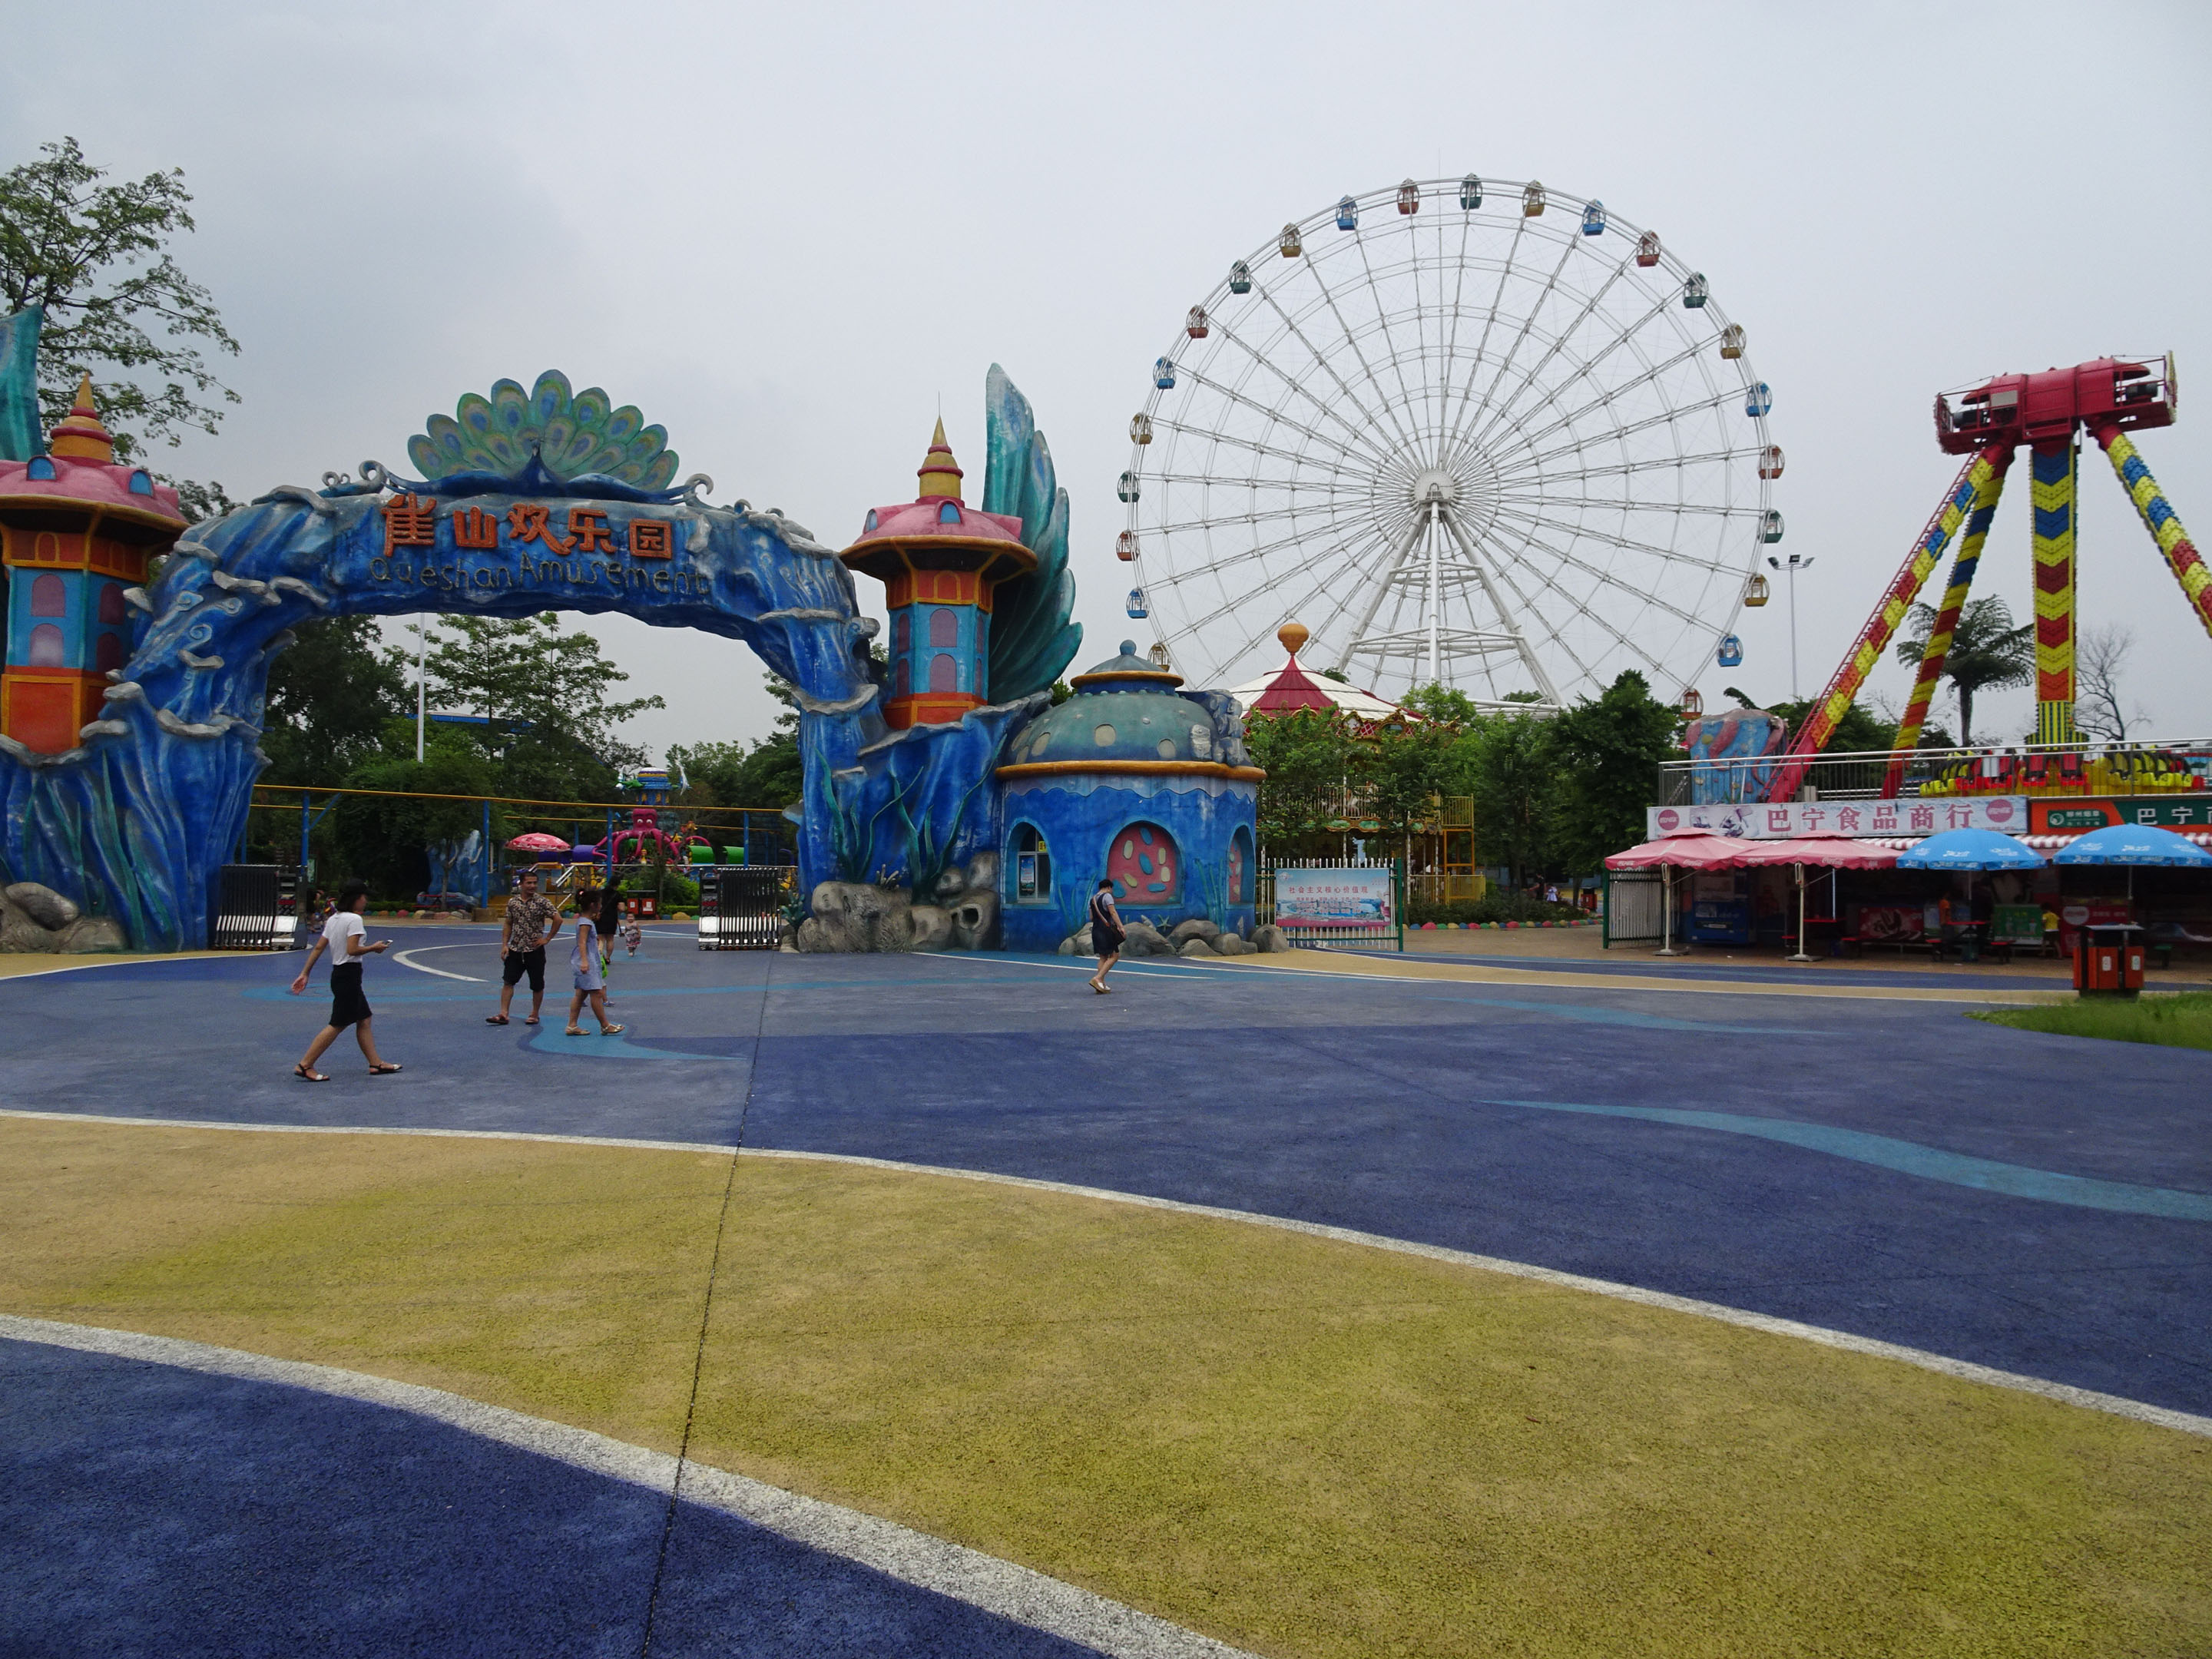 The Entrance Gate To The Children's Amusement Park With The